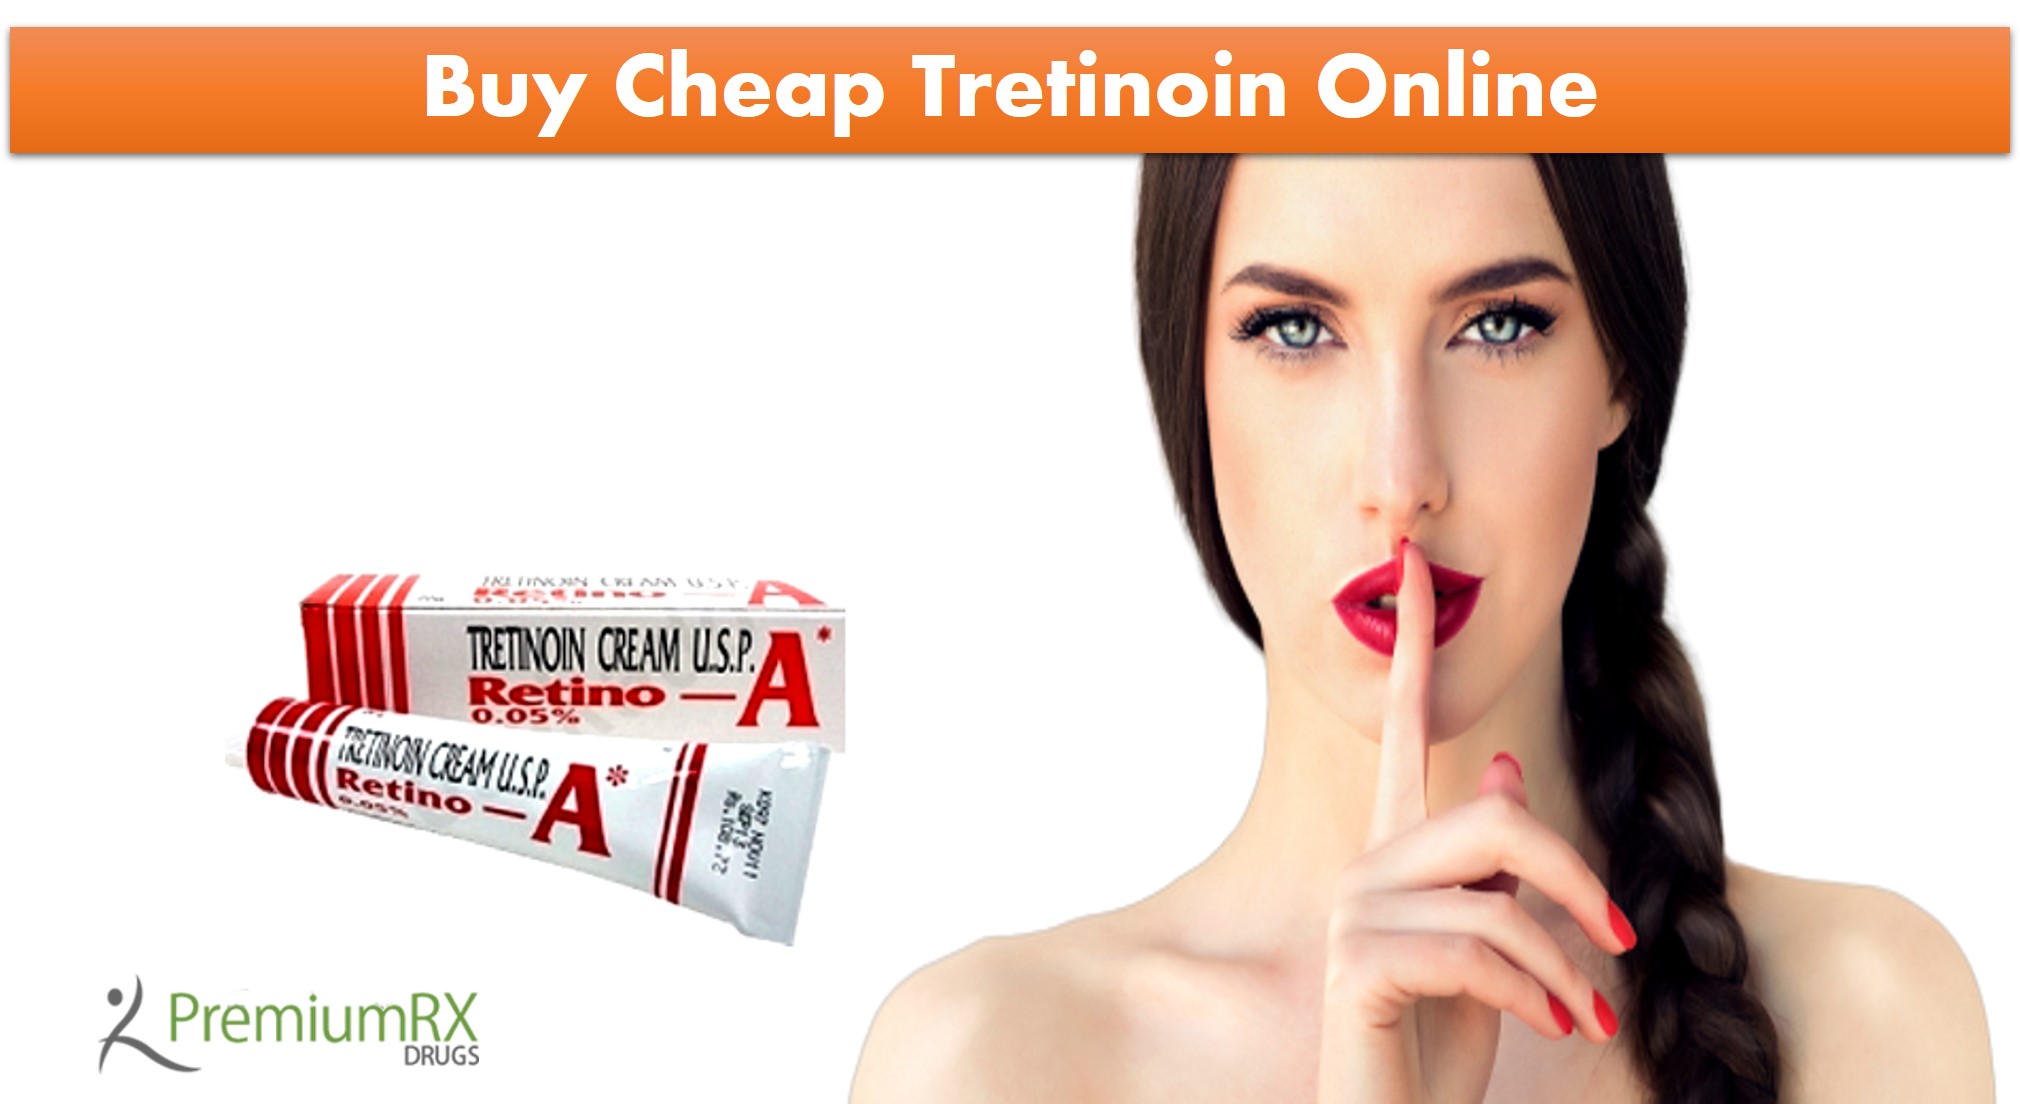 Where Can Buy Cheap Tretinoin Online